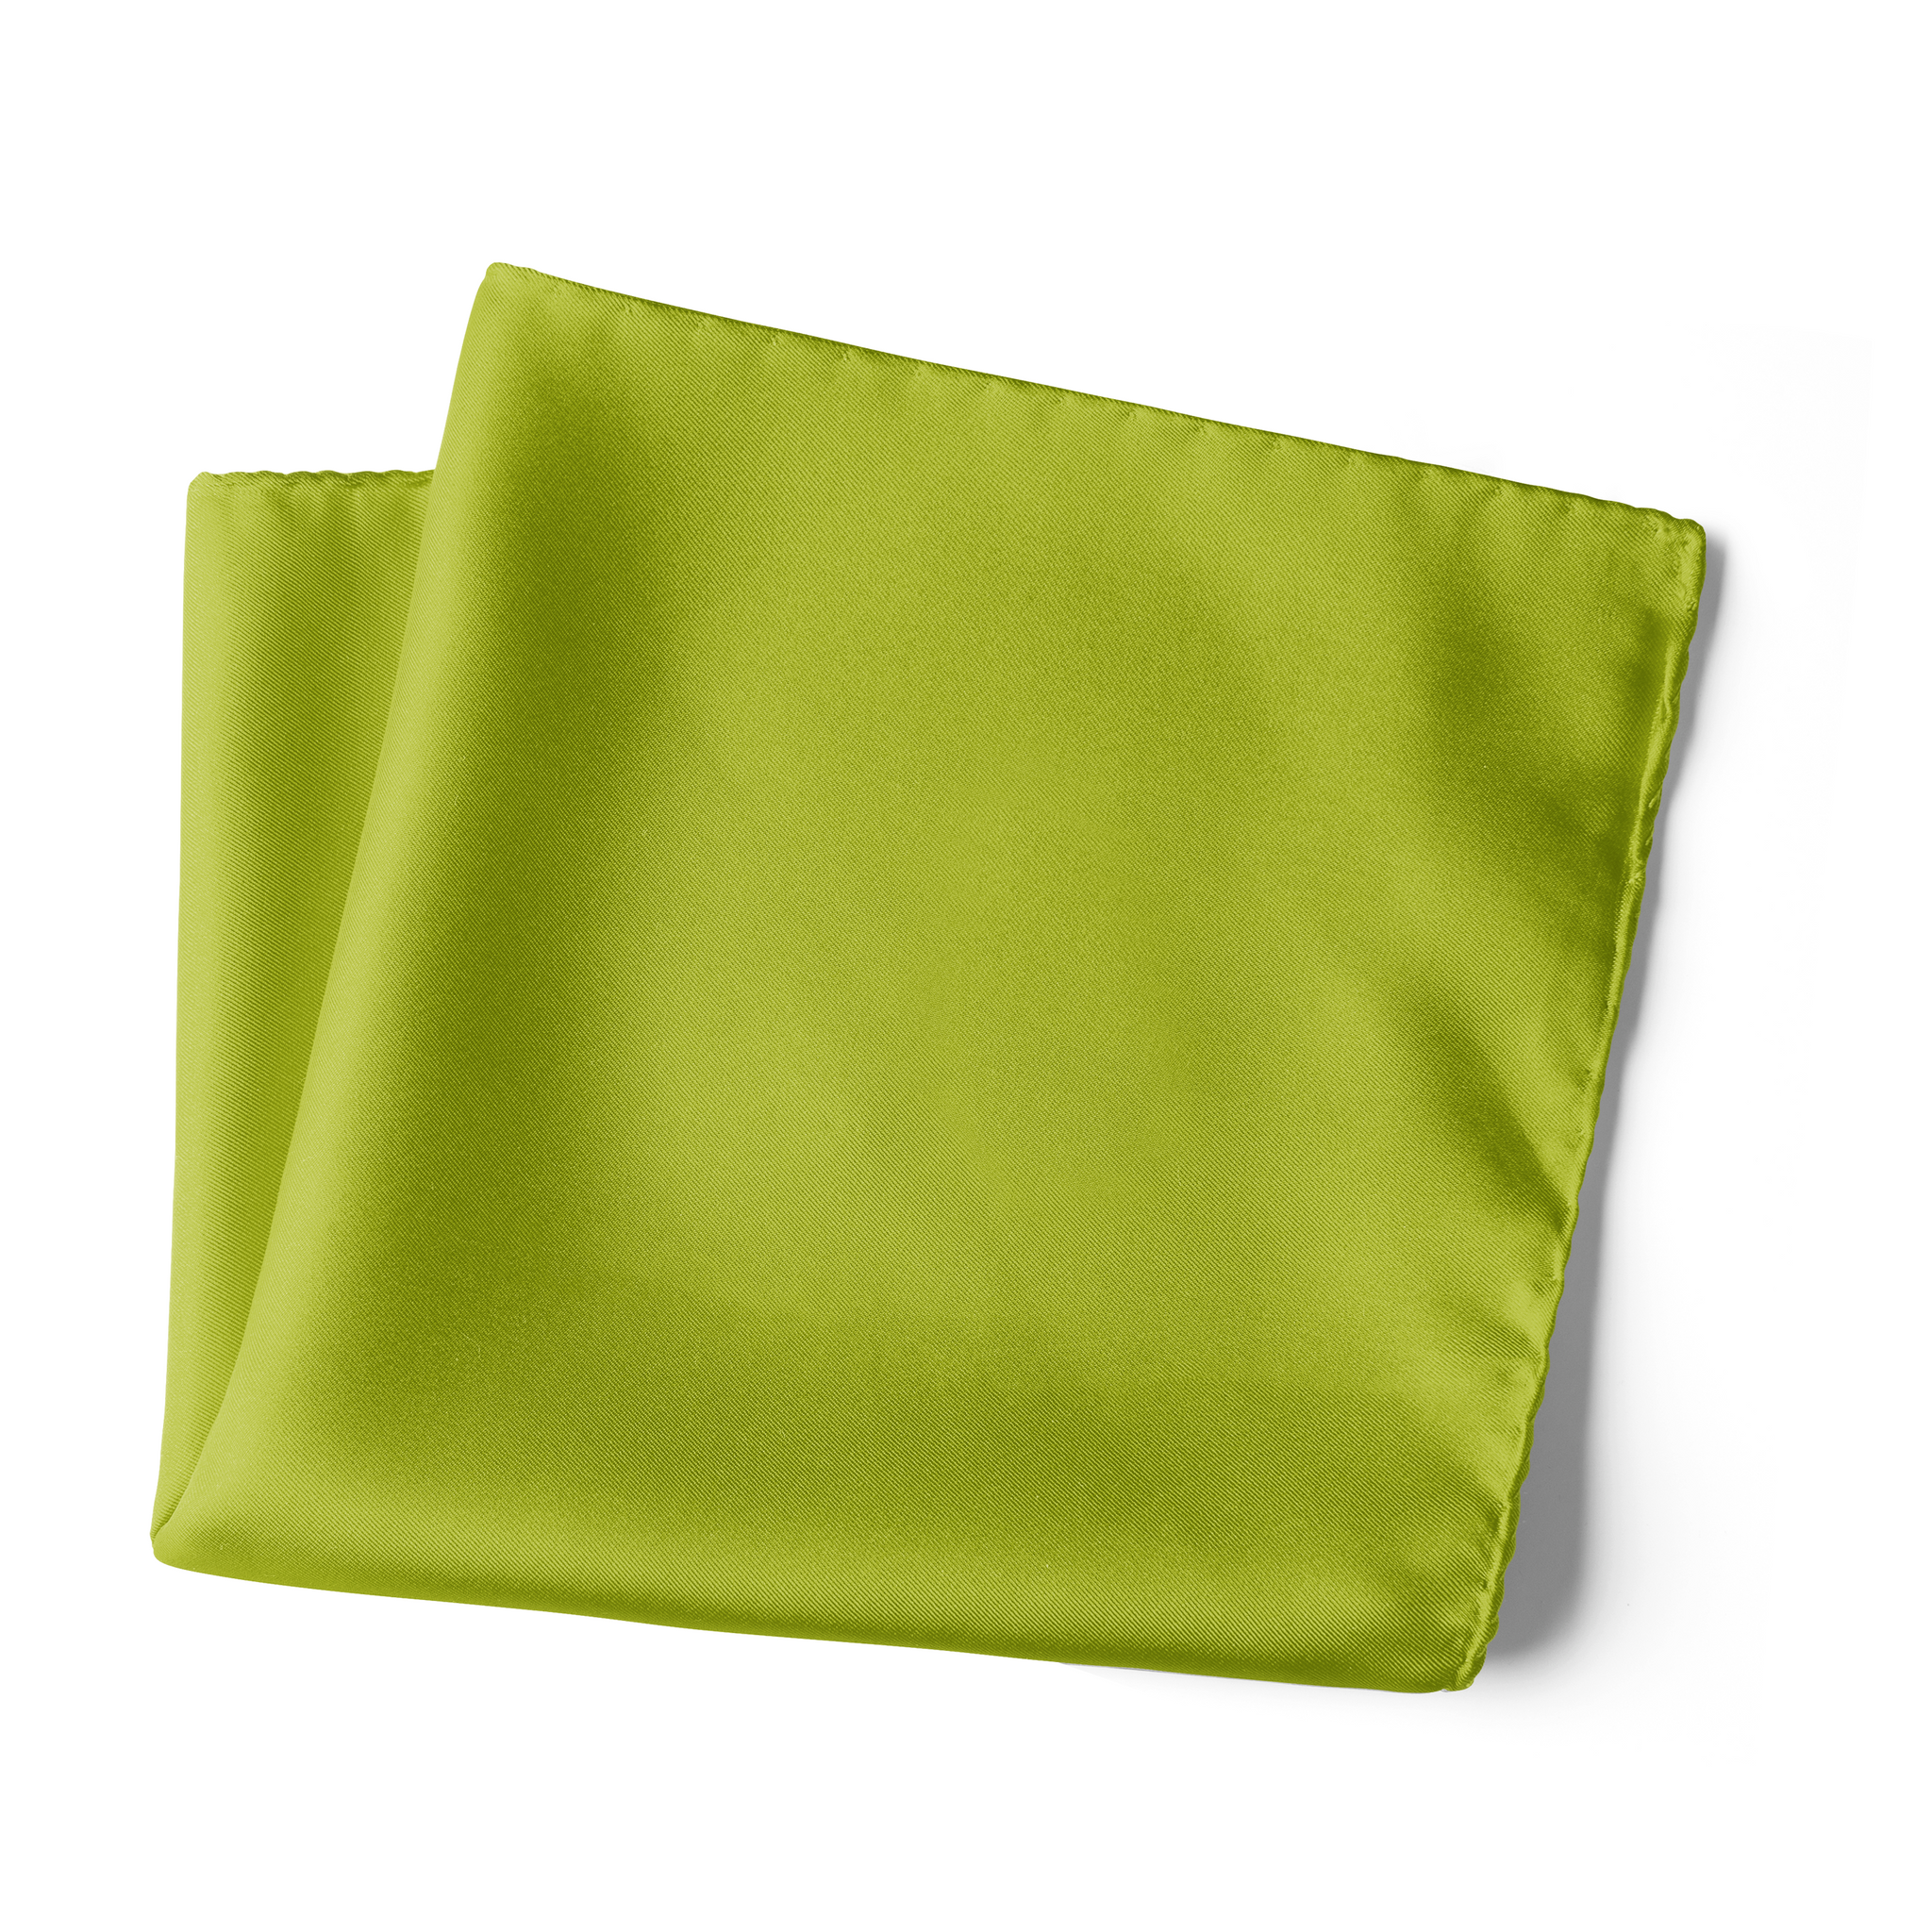 Chokore Lime Green Pure Silk Pocket Square, from the Solids Line